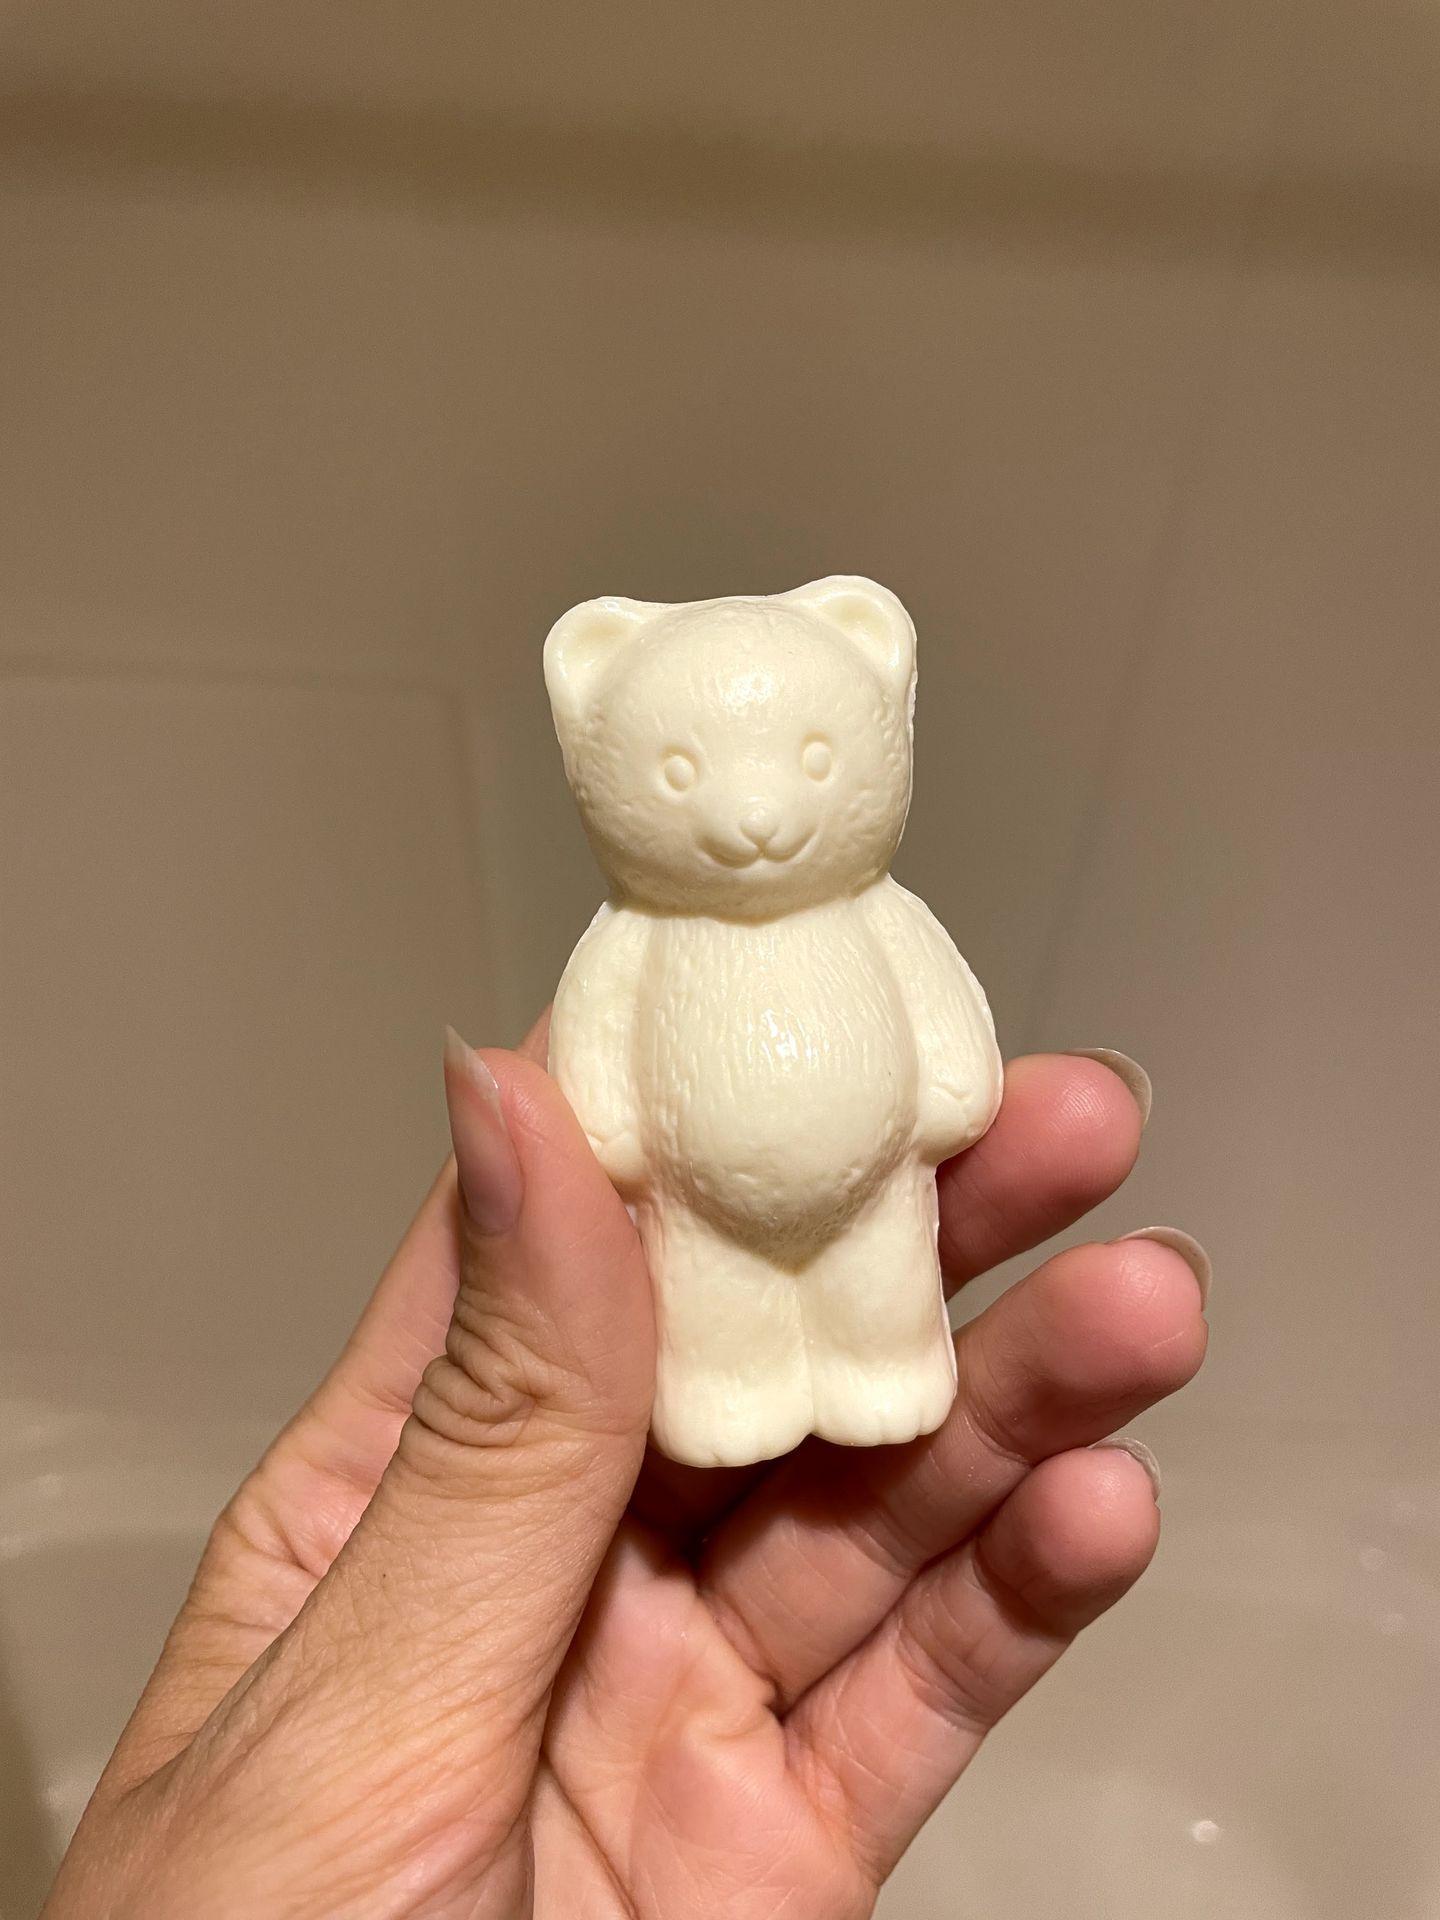 A small bear made out of soap